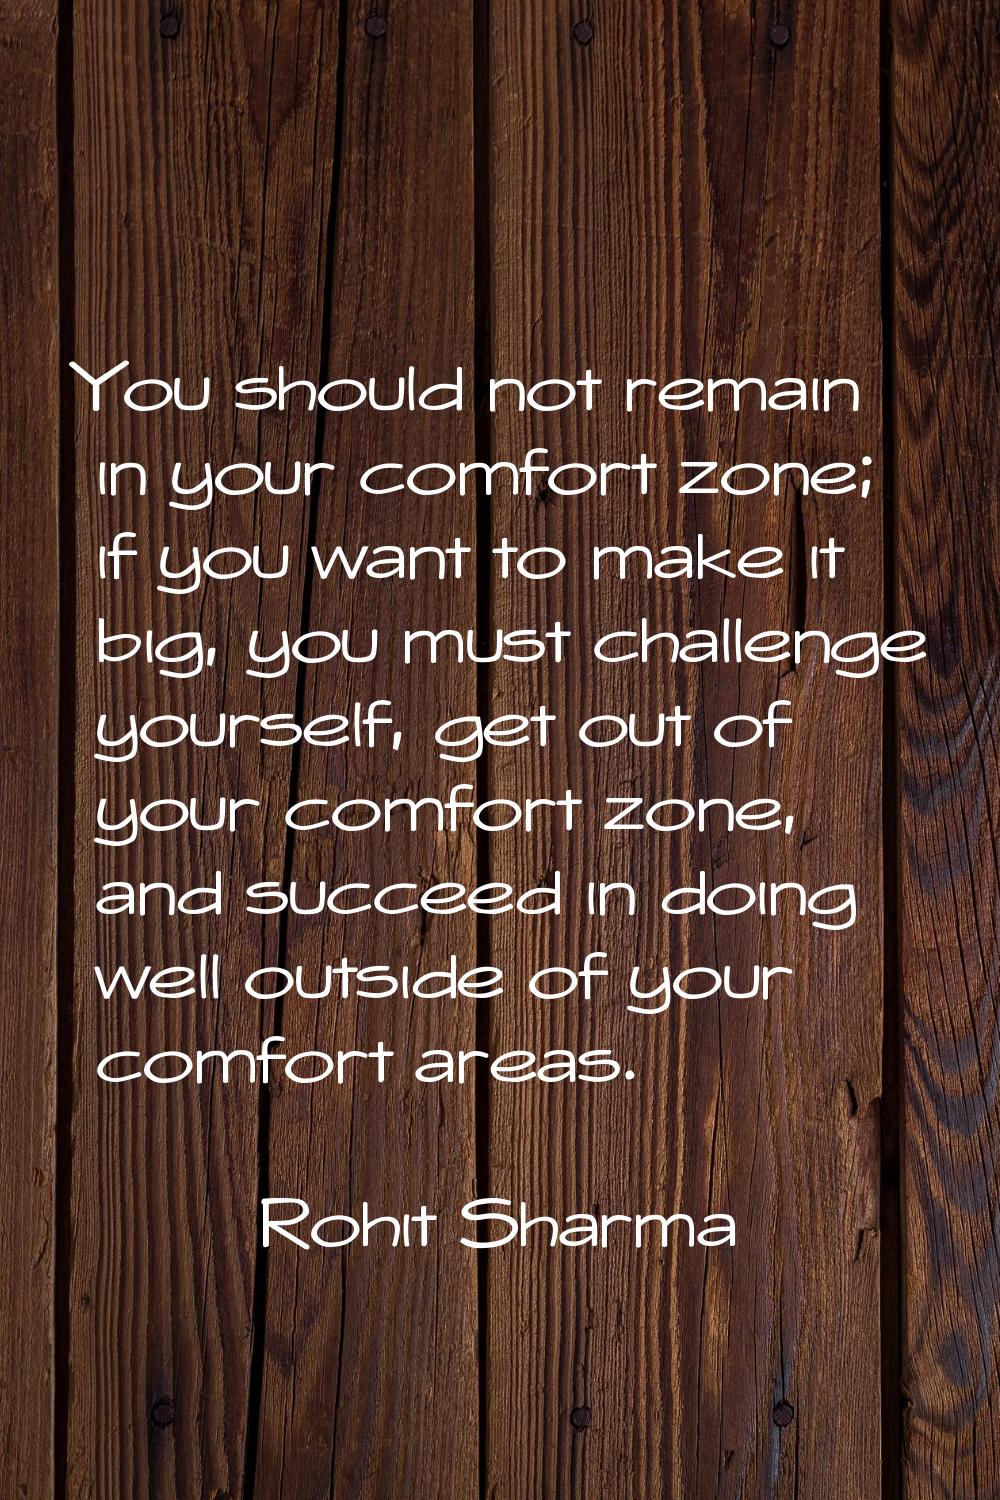 You should not remain in your comfort zone; if you want to make it big, you must challenge yourself